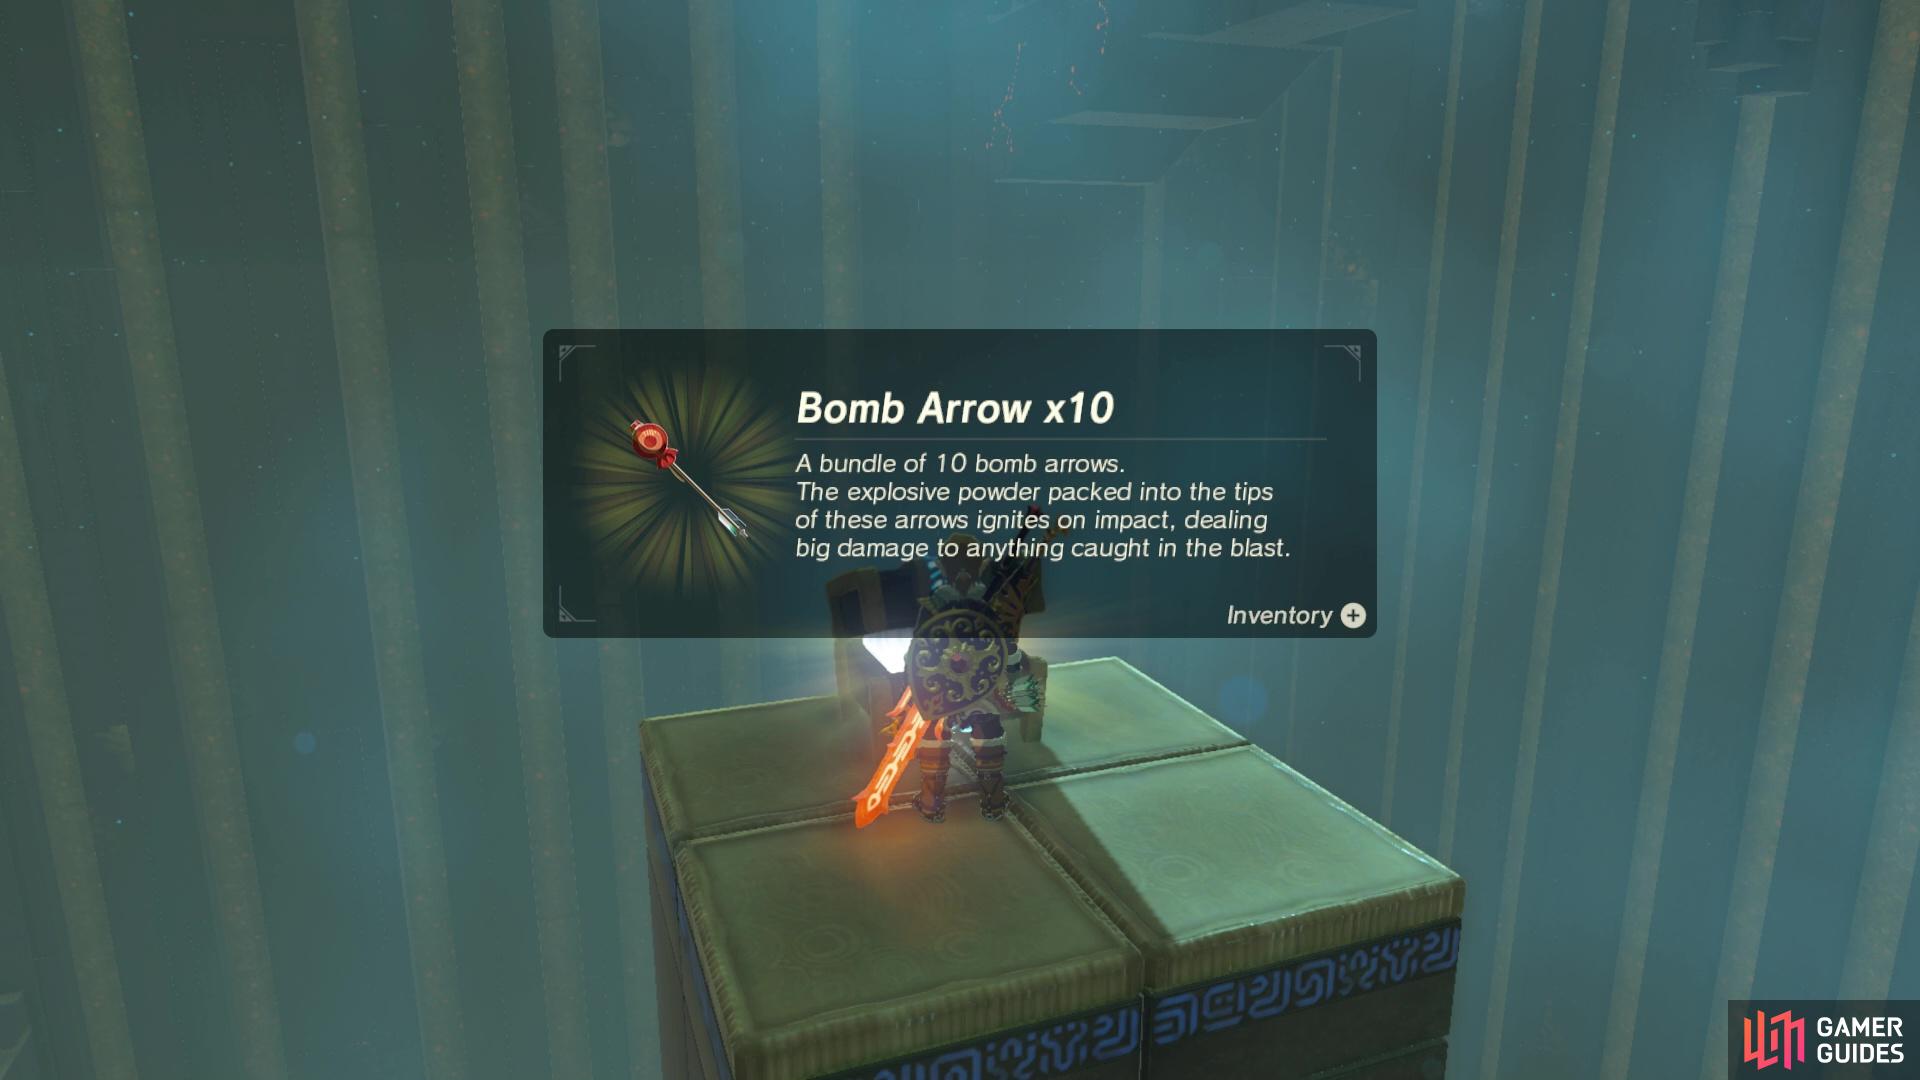 You can loot the chest for some Bomb Arrows.